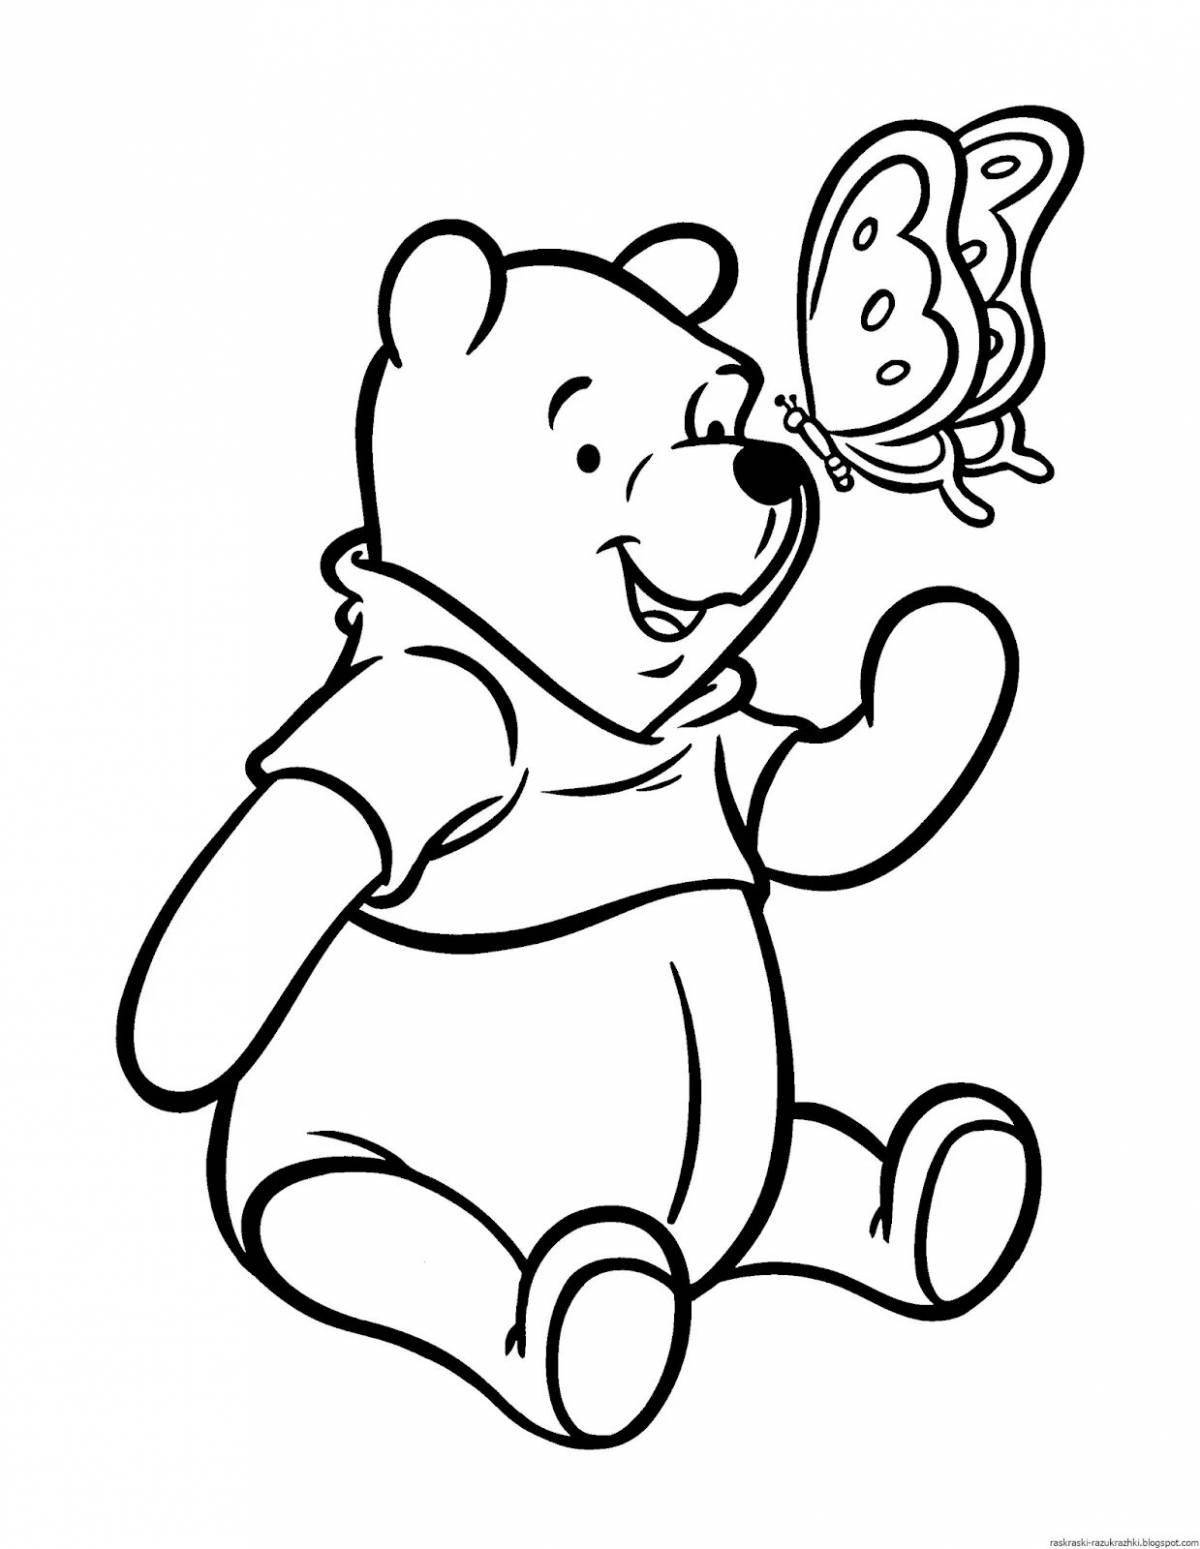 Color-blast coloring bear for children 3-4 years old